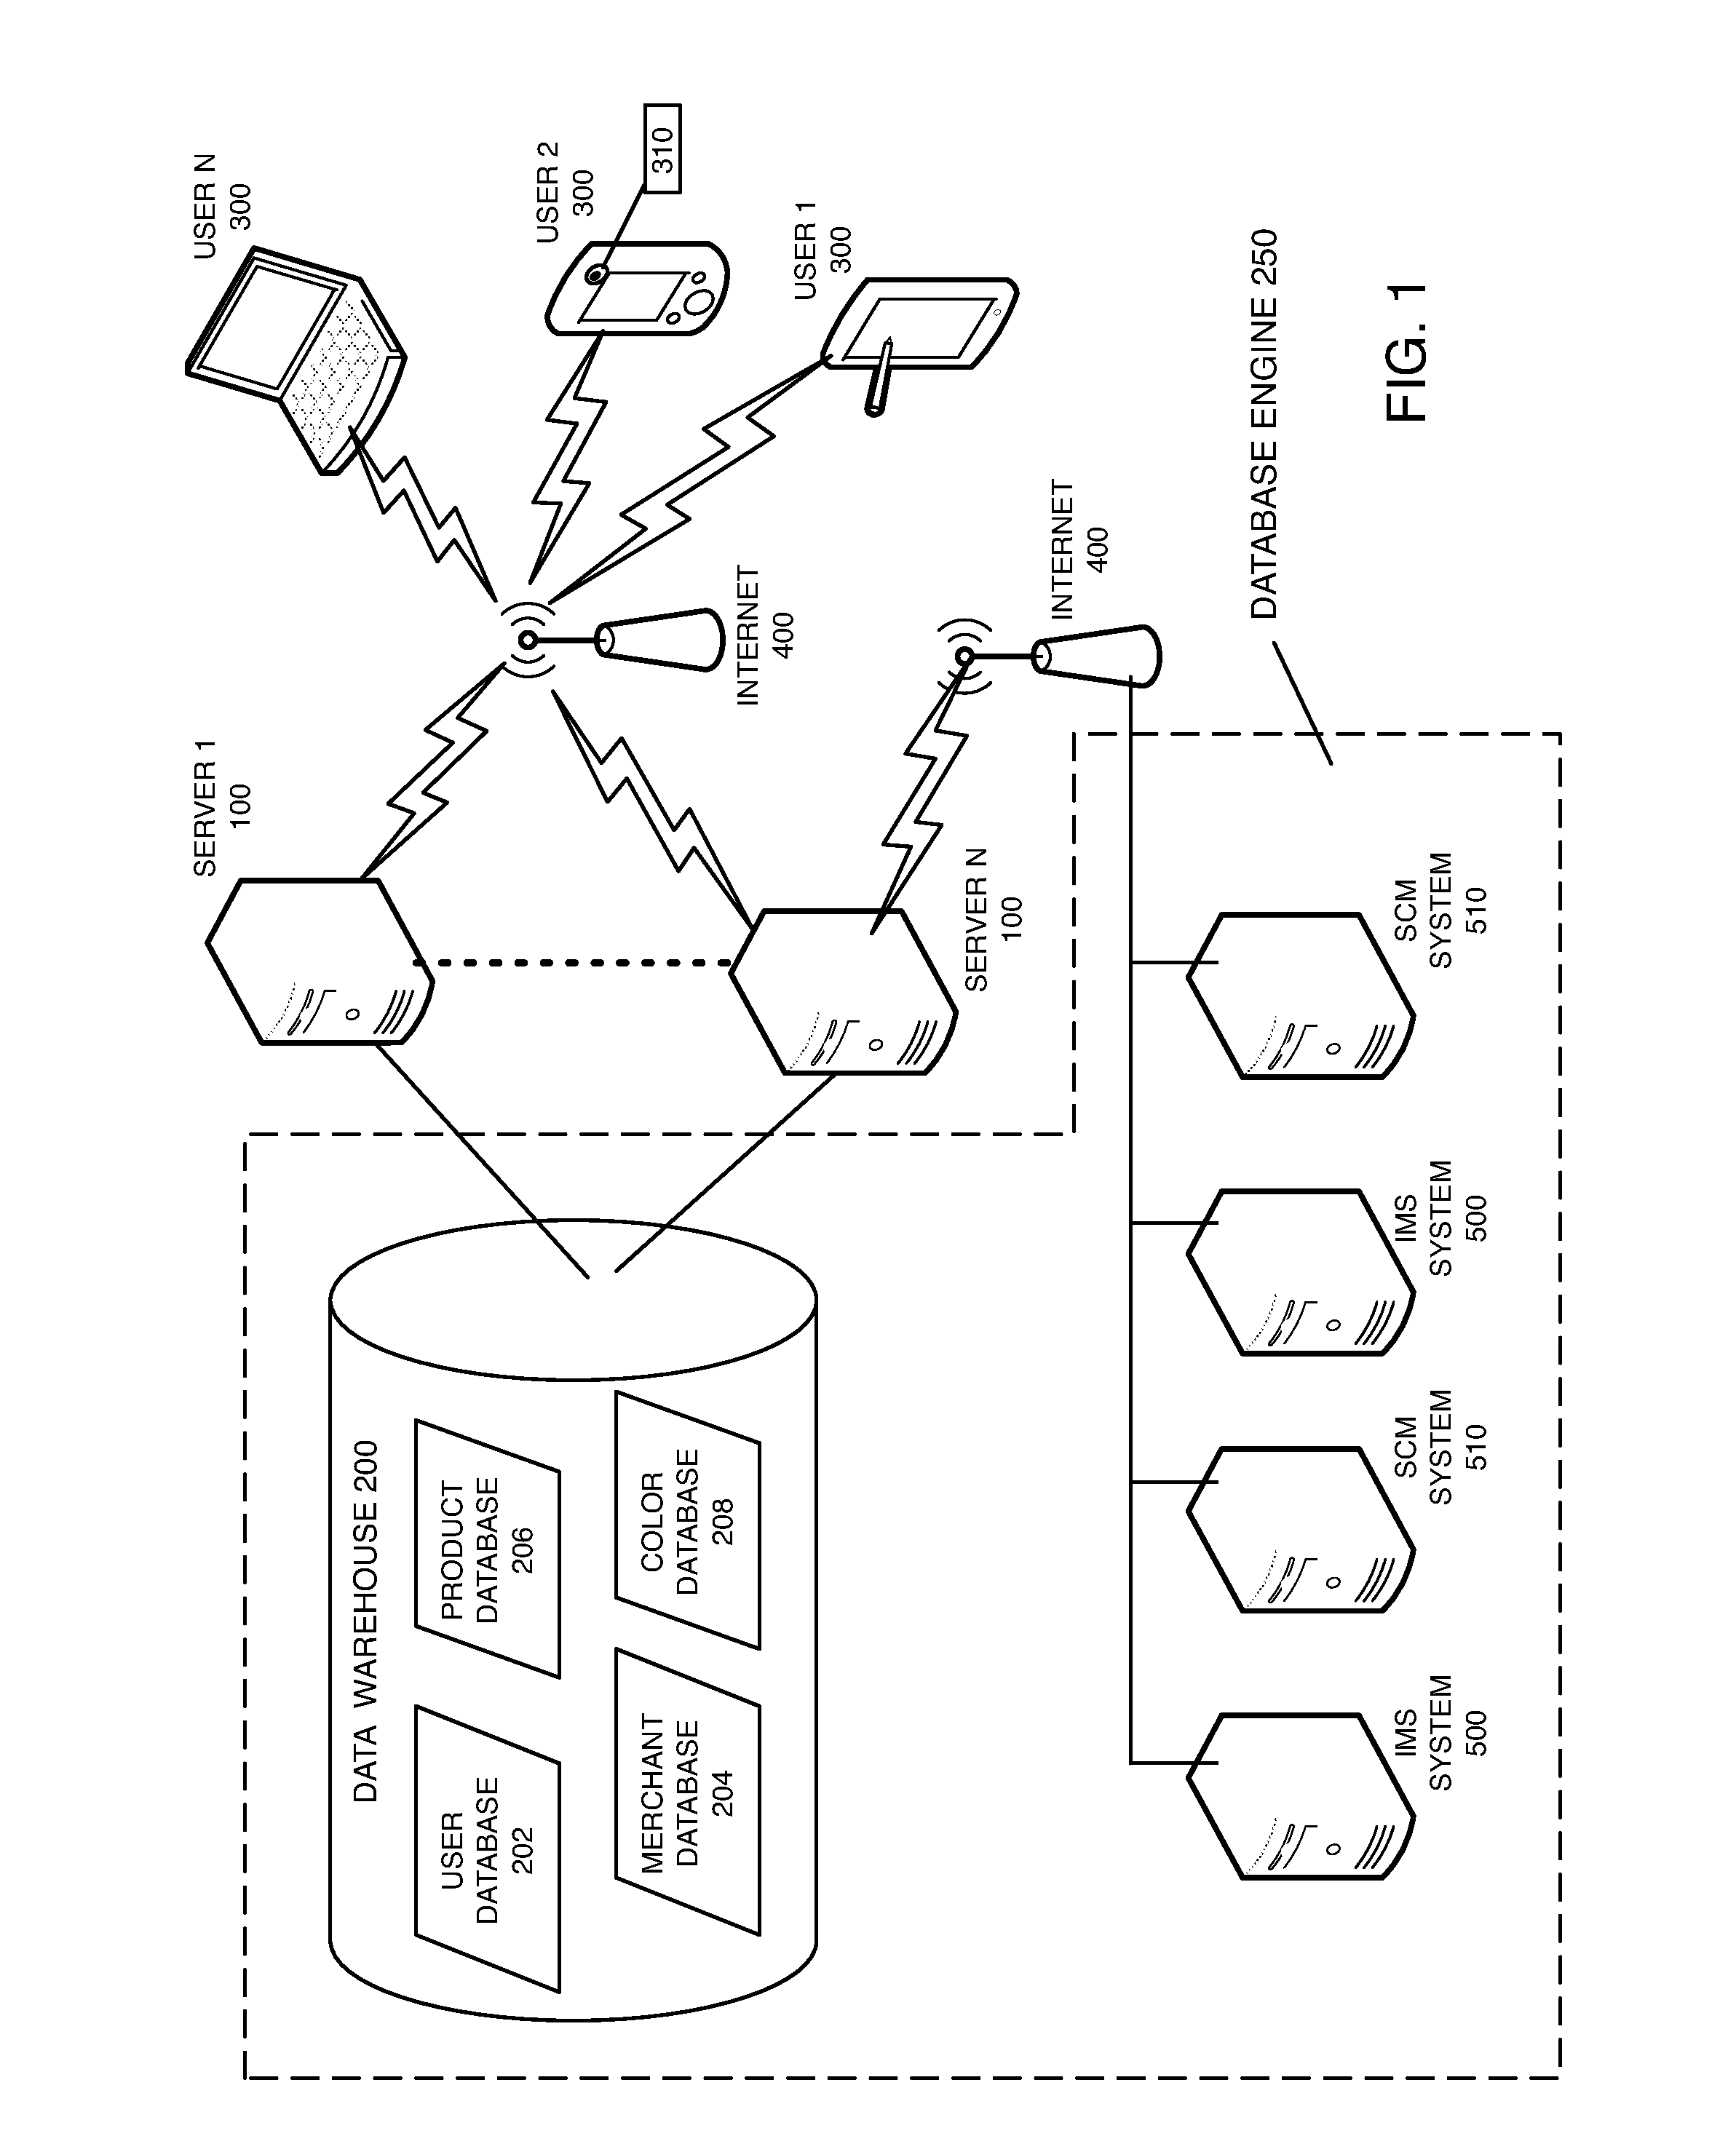 System and method for identifying, searching and matching products based on color